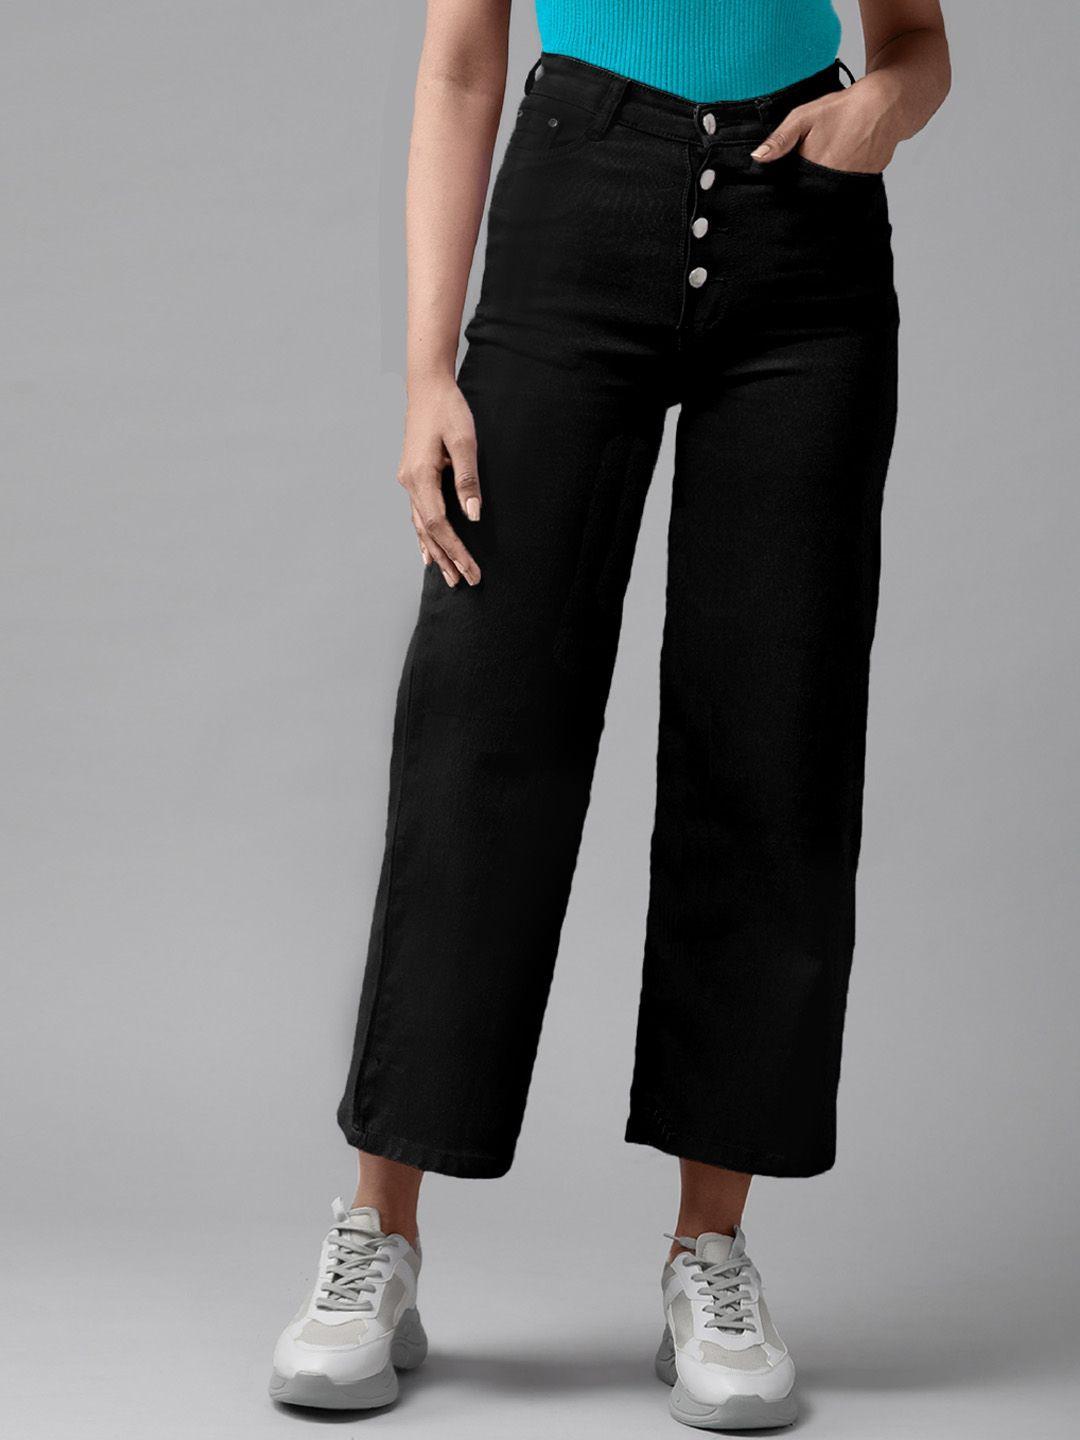 the-dry-state-black-women-mid-rise-relaxed-straight-fit-jeans